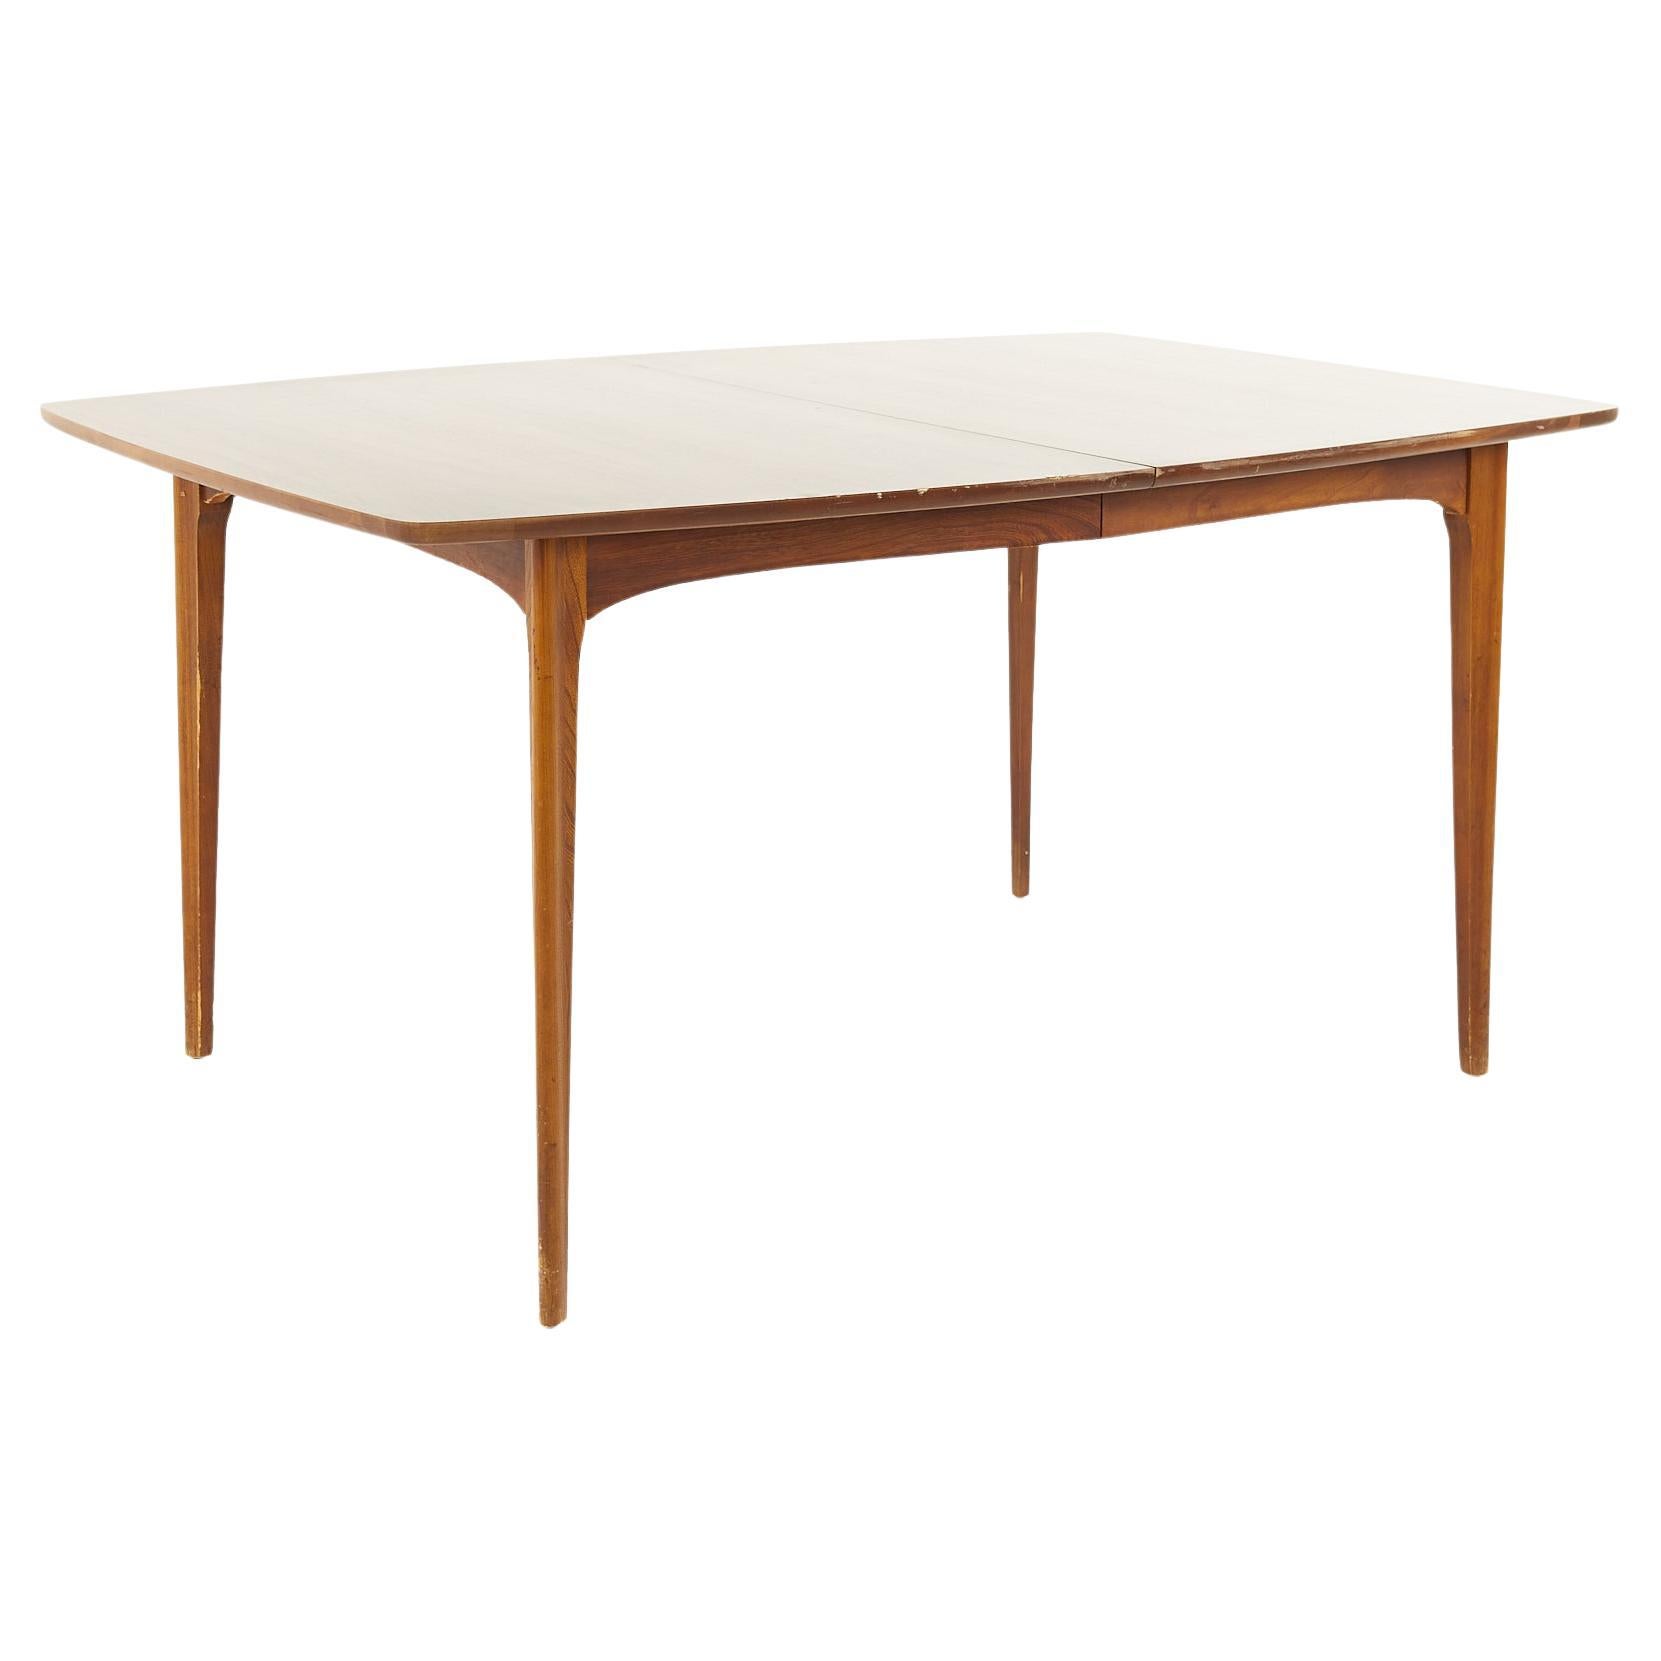 Kent Coffey Perspecta Mid Century Walnut Surfboard Dining Table For Sale